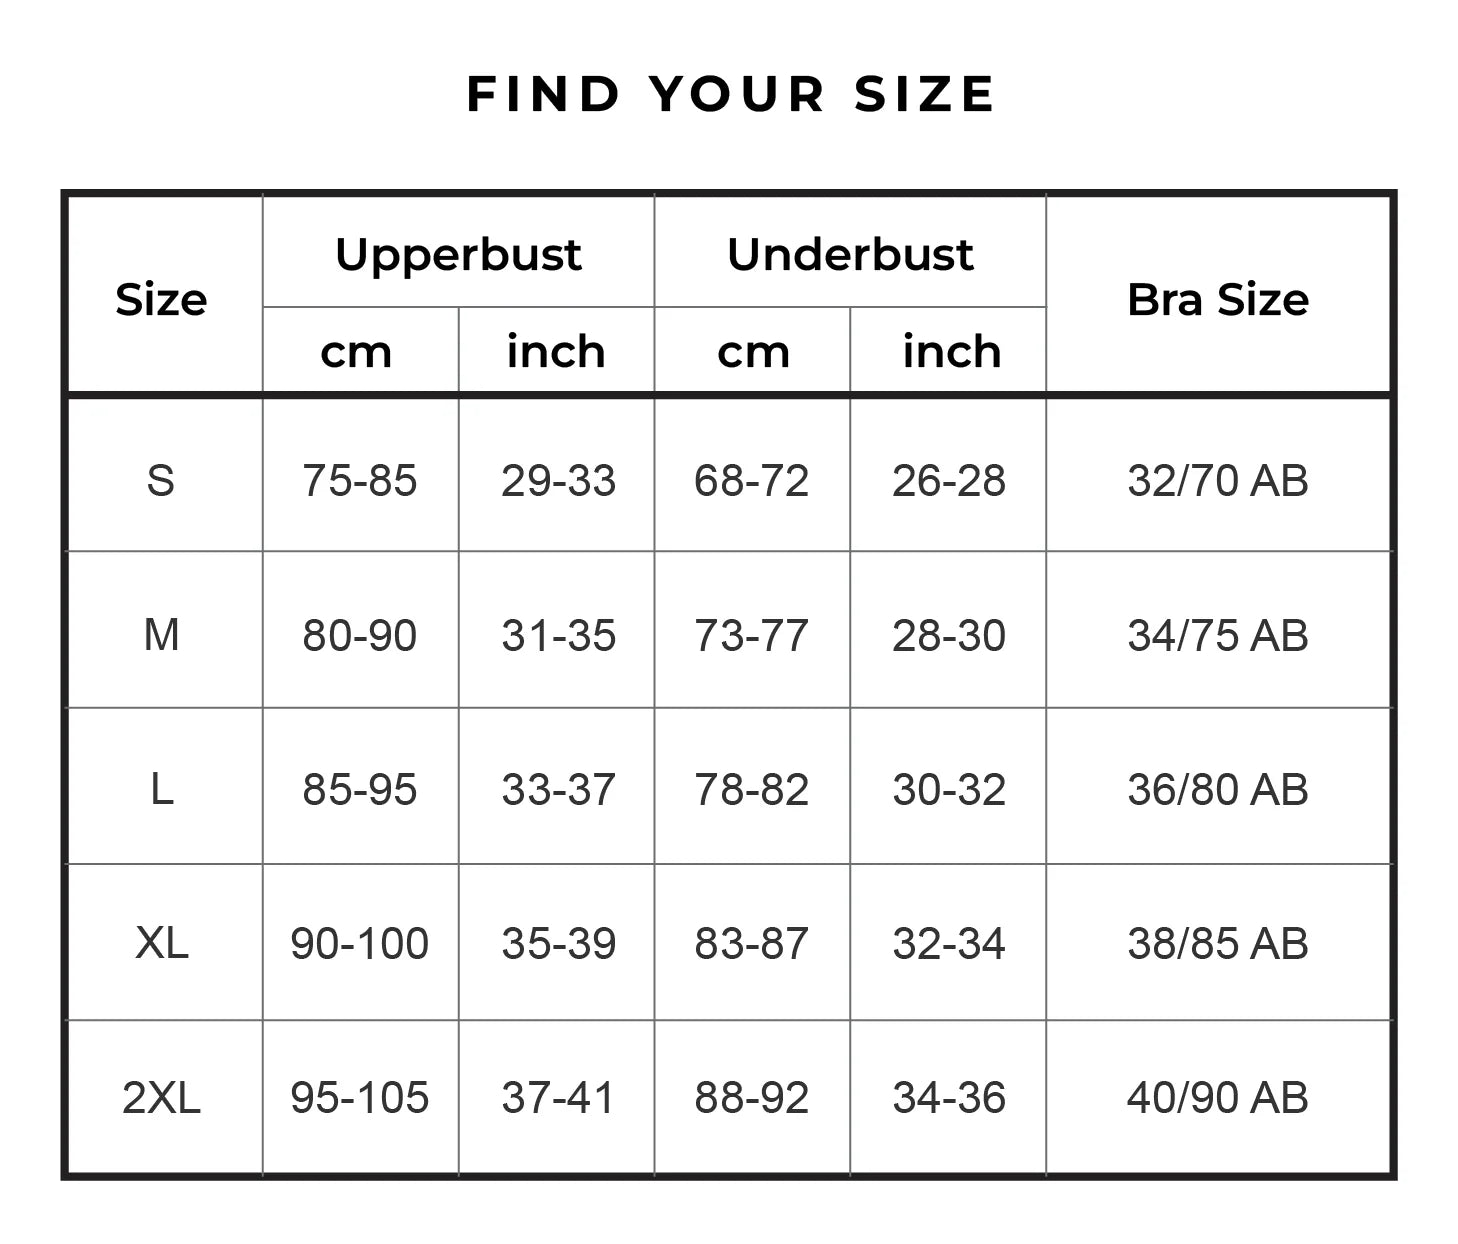 Find your perfect fit with Chantelle's Secret size chart for seamless bras, ranging from S to 2XL with corresponding measurements in cm and inches.